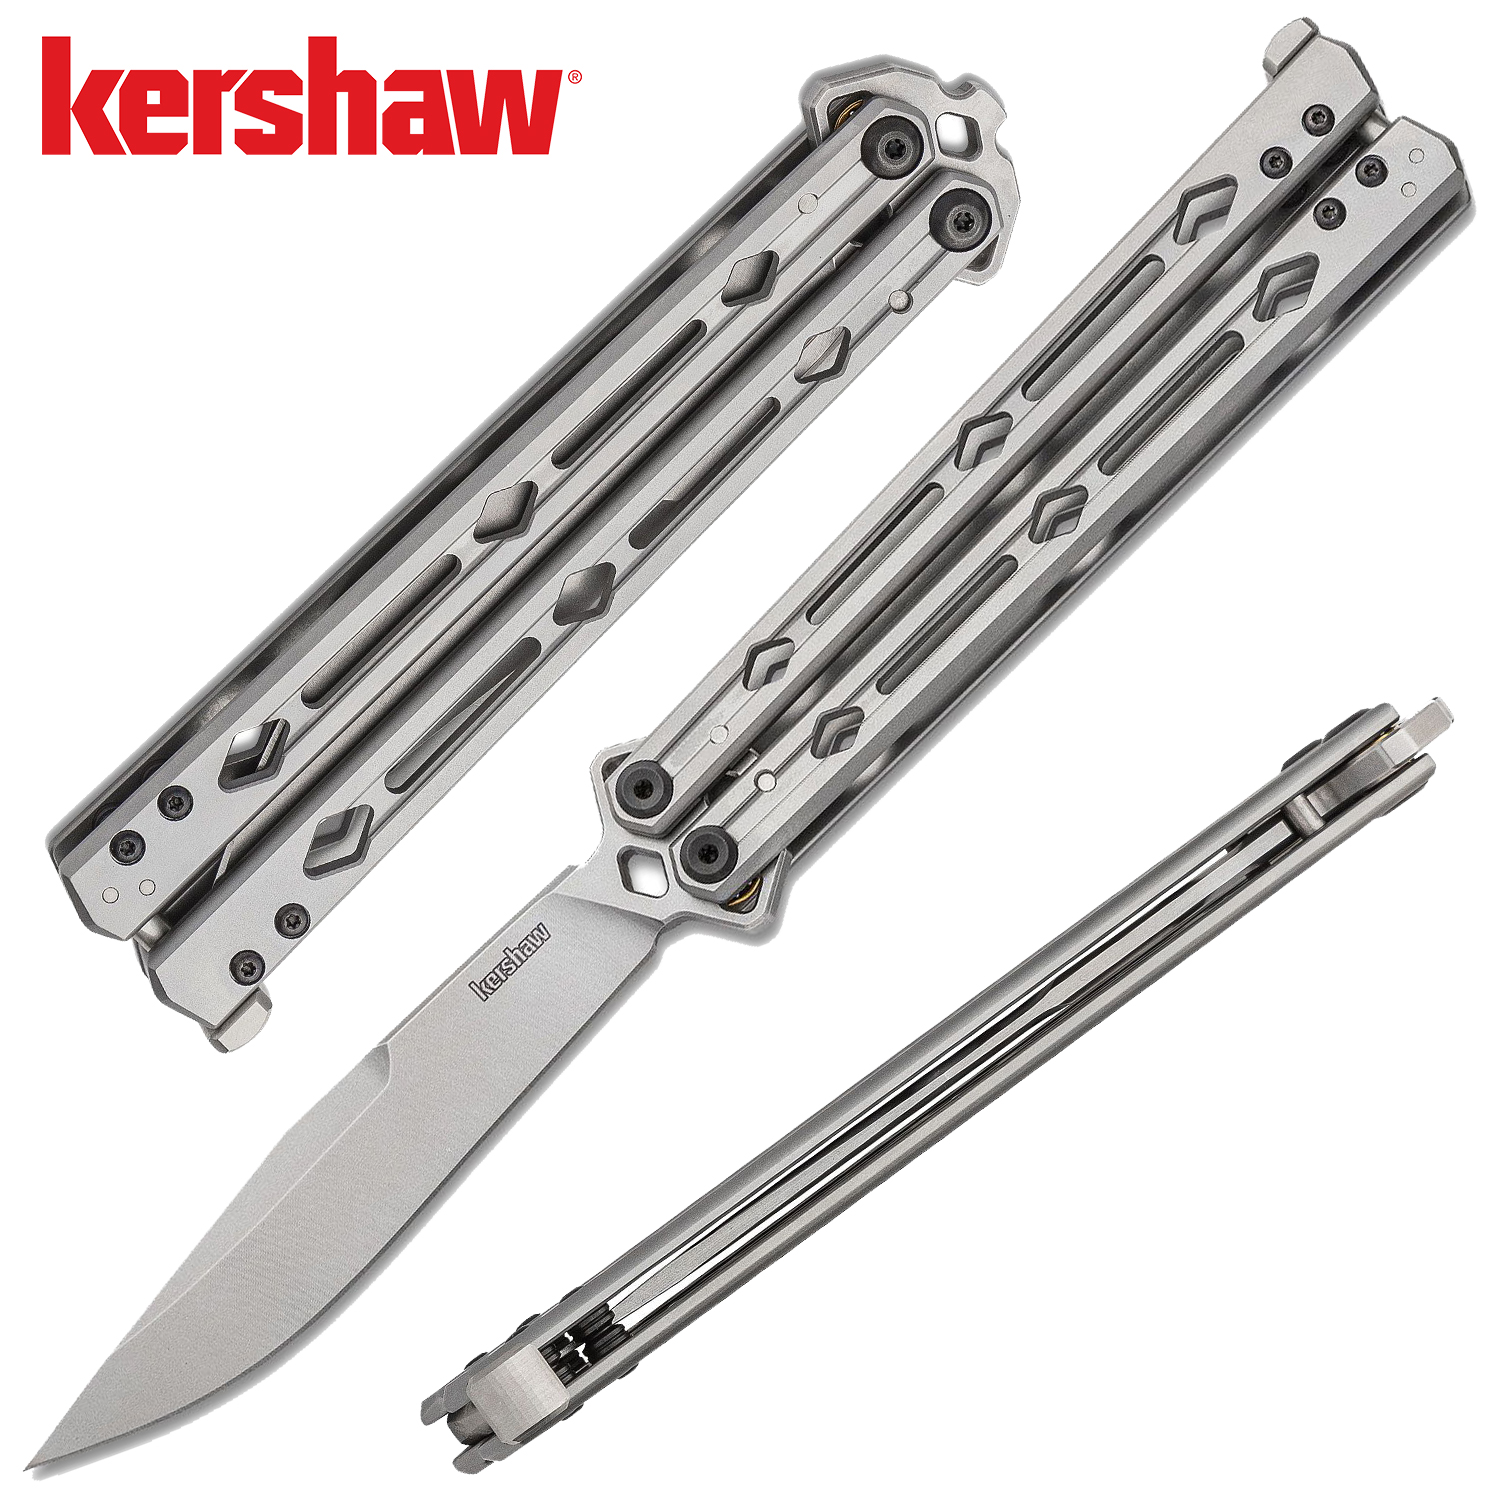 Kershaw Lucha Balisong Butterfly Knife 10 Inch